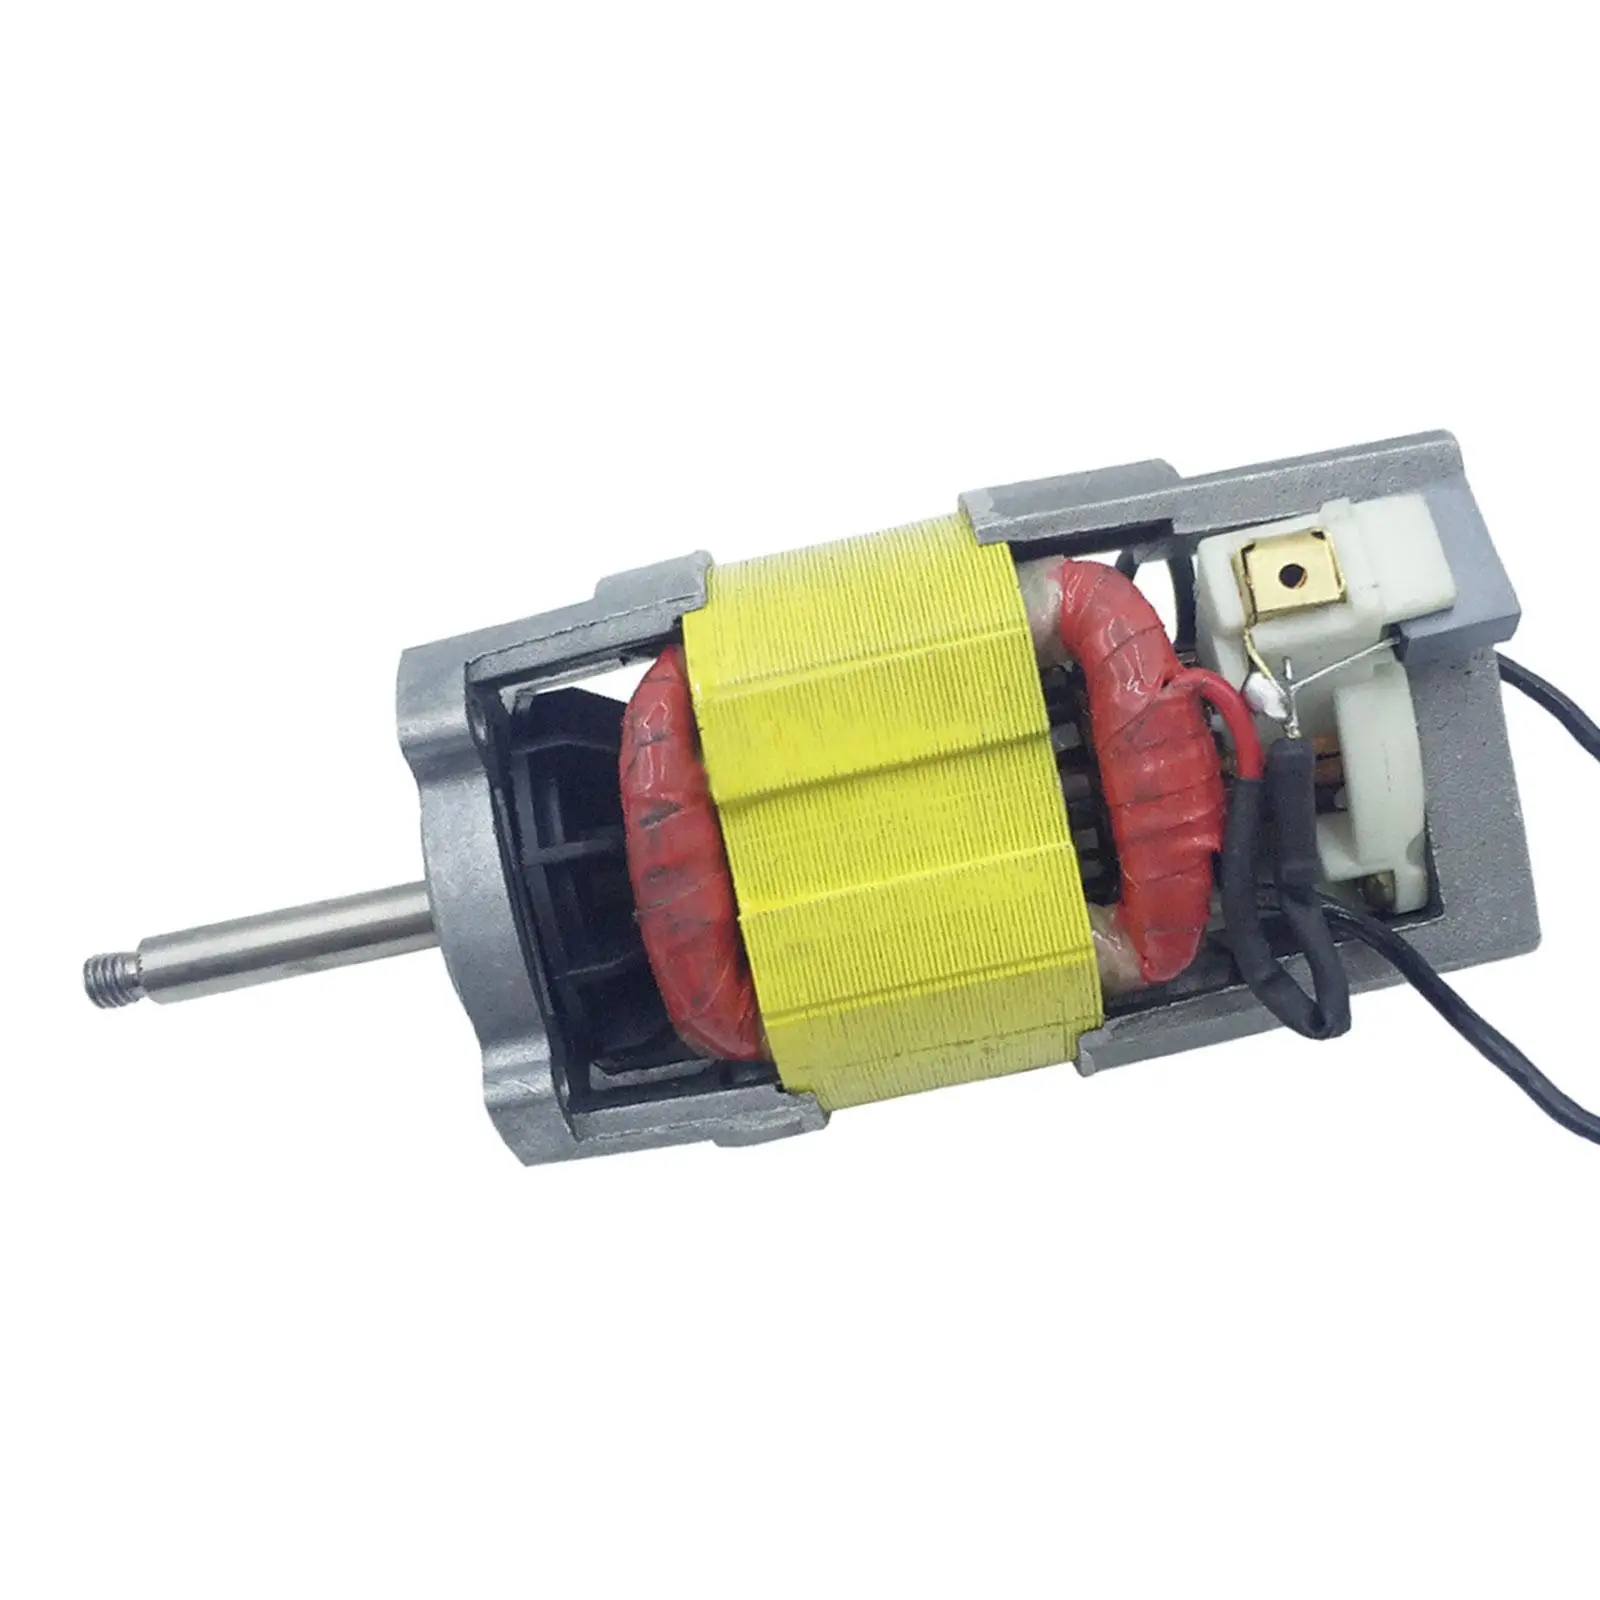 Hot Air Motor for Crafts Low Temperature Rising Low Calorific Value 50Hz High Speed Bearing Durable 1600W Electric Hot Air Motor